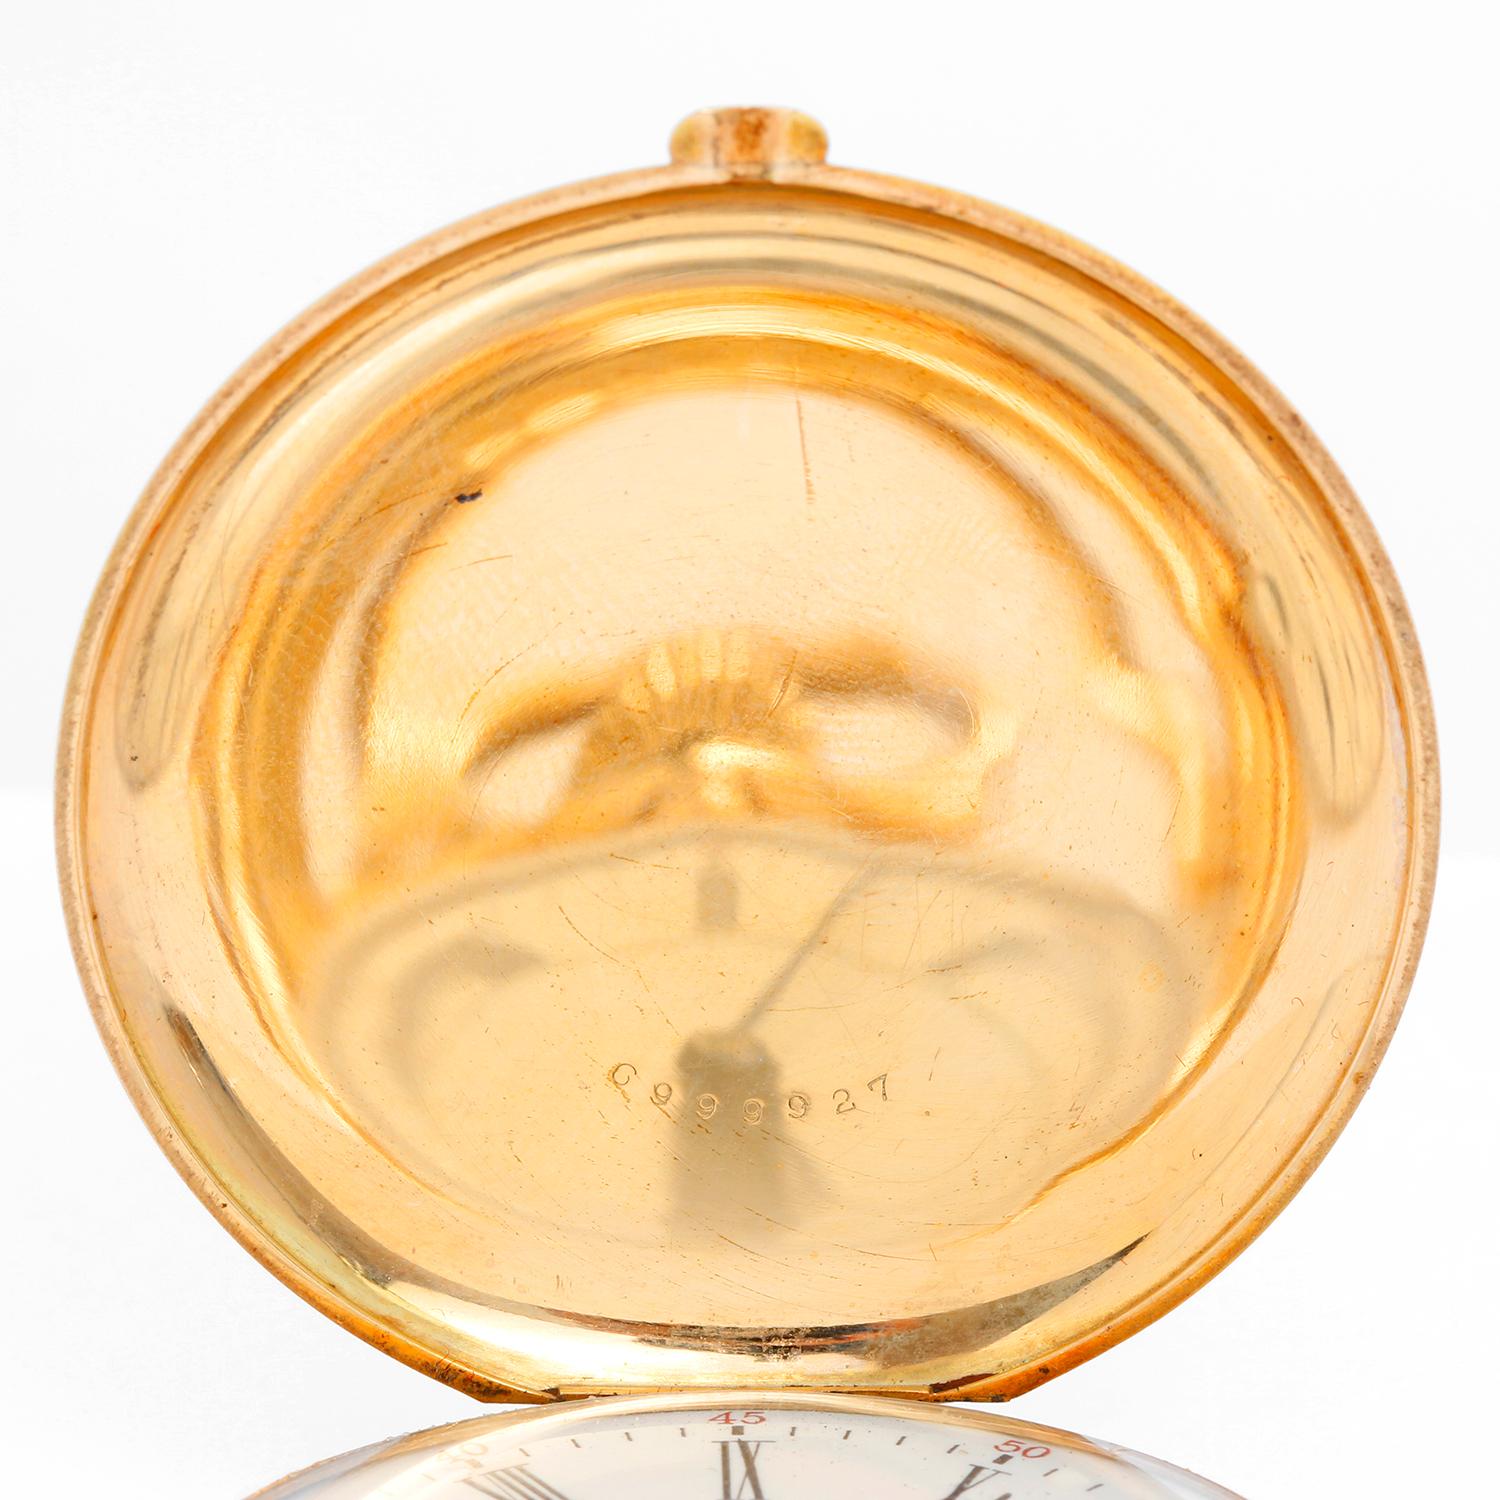 Waltham 14K Yellow Gold Pocket Watch - Manual winding; 21 Jewels crescent street. 14K Solid Yellow Gold (49 mm); Ornate monogram on case back . White dial with Roman numerals with sunken sub second dial. Pre-owned with custom box. Circa 1900's . 